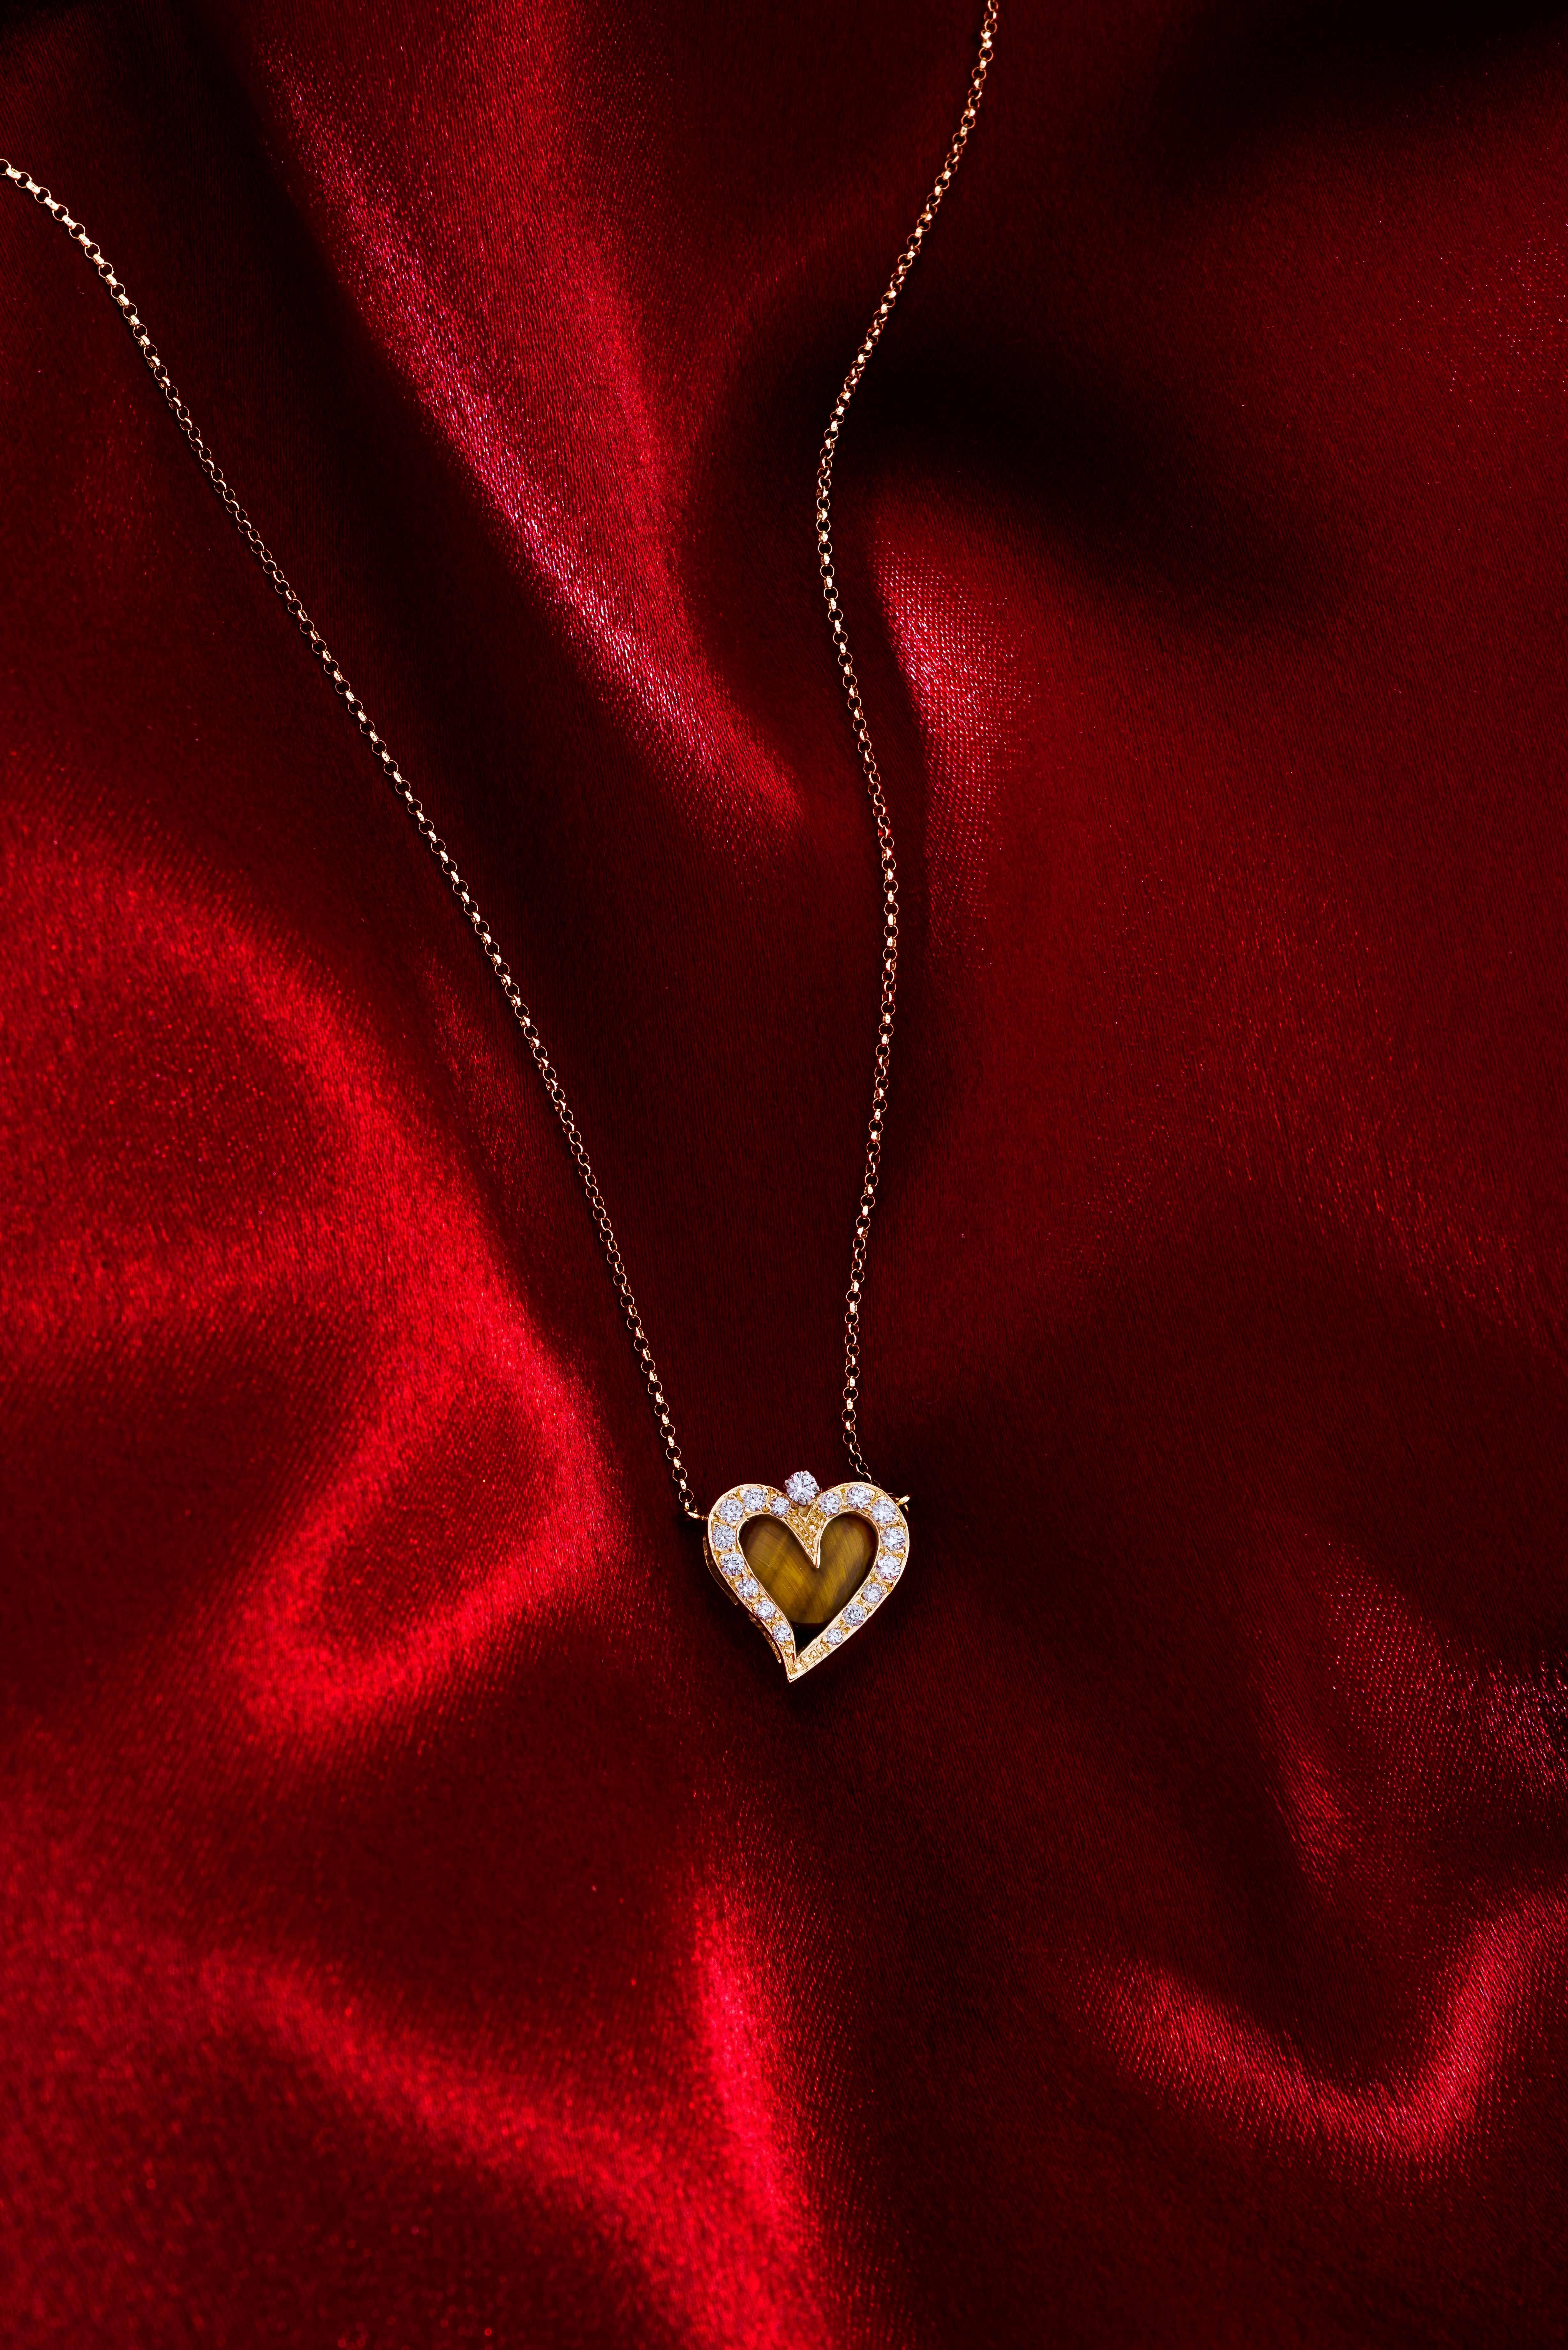 A detailed diamond heart pendant alive with life and happy movement in its shape. Hand made with a special tiered setting made to envelop a special stone center, here a chatoyancy cats eye effect Tigers Eye. A Heart pendant necklace in 18 karat